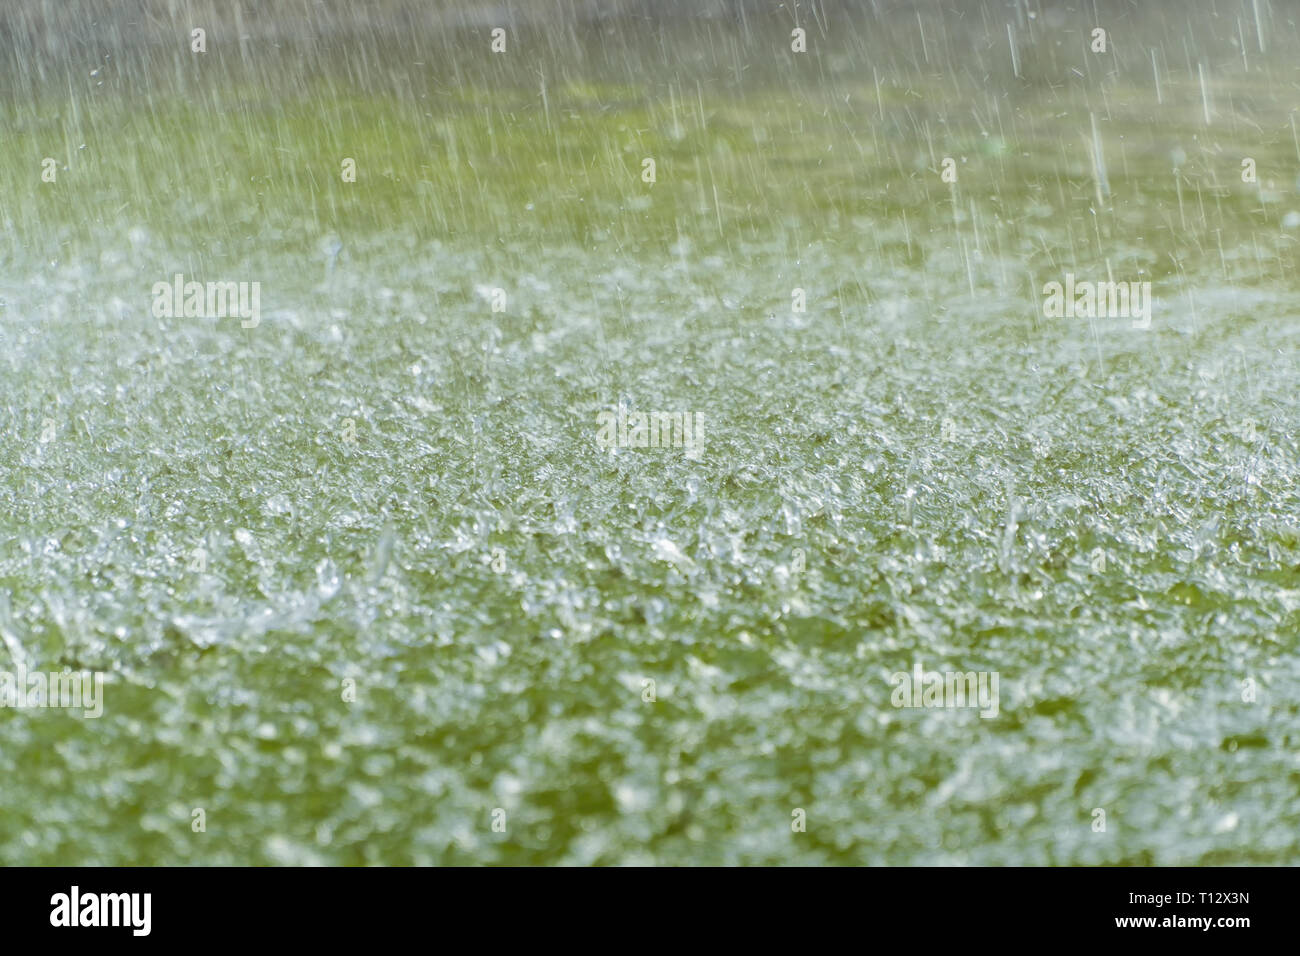 Droplets hitting water surface. Raindrops falling on the green surface of the water. Motion blur. Stock Photo